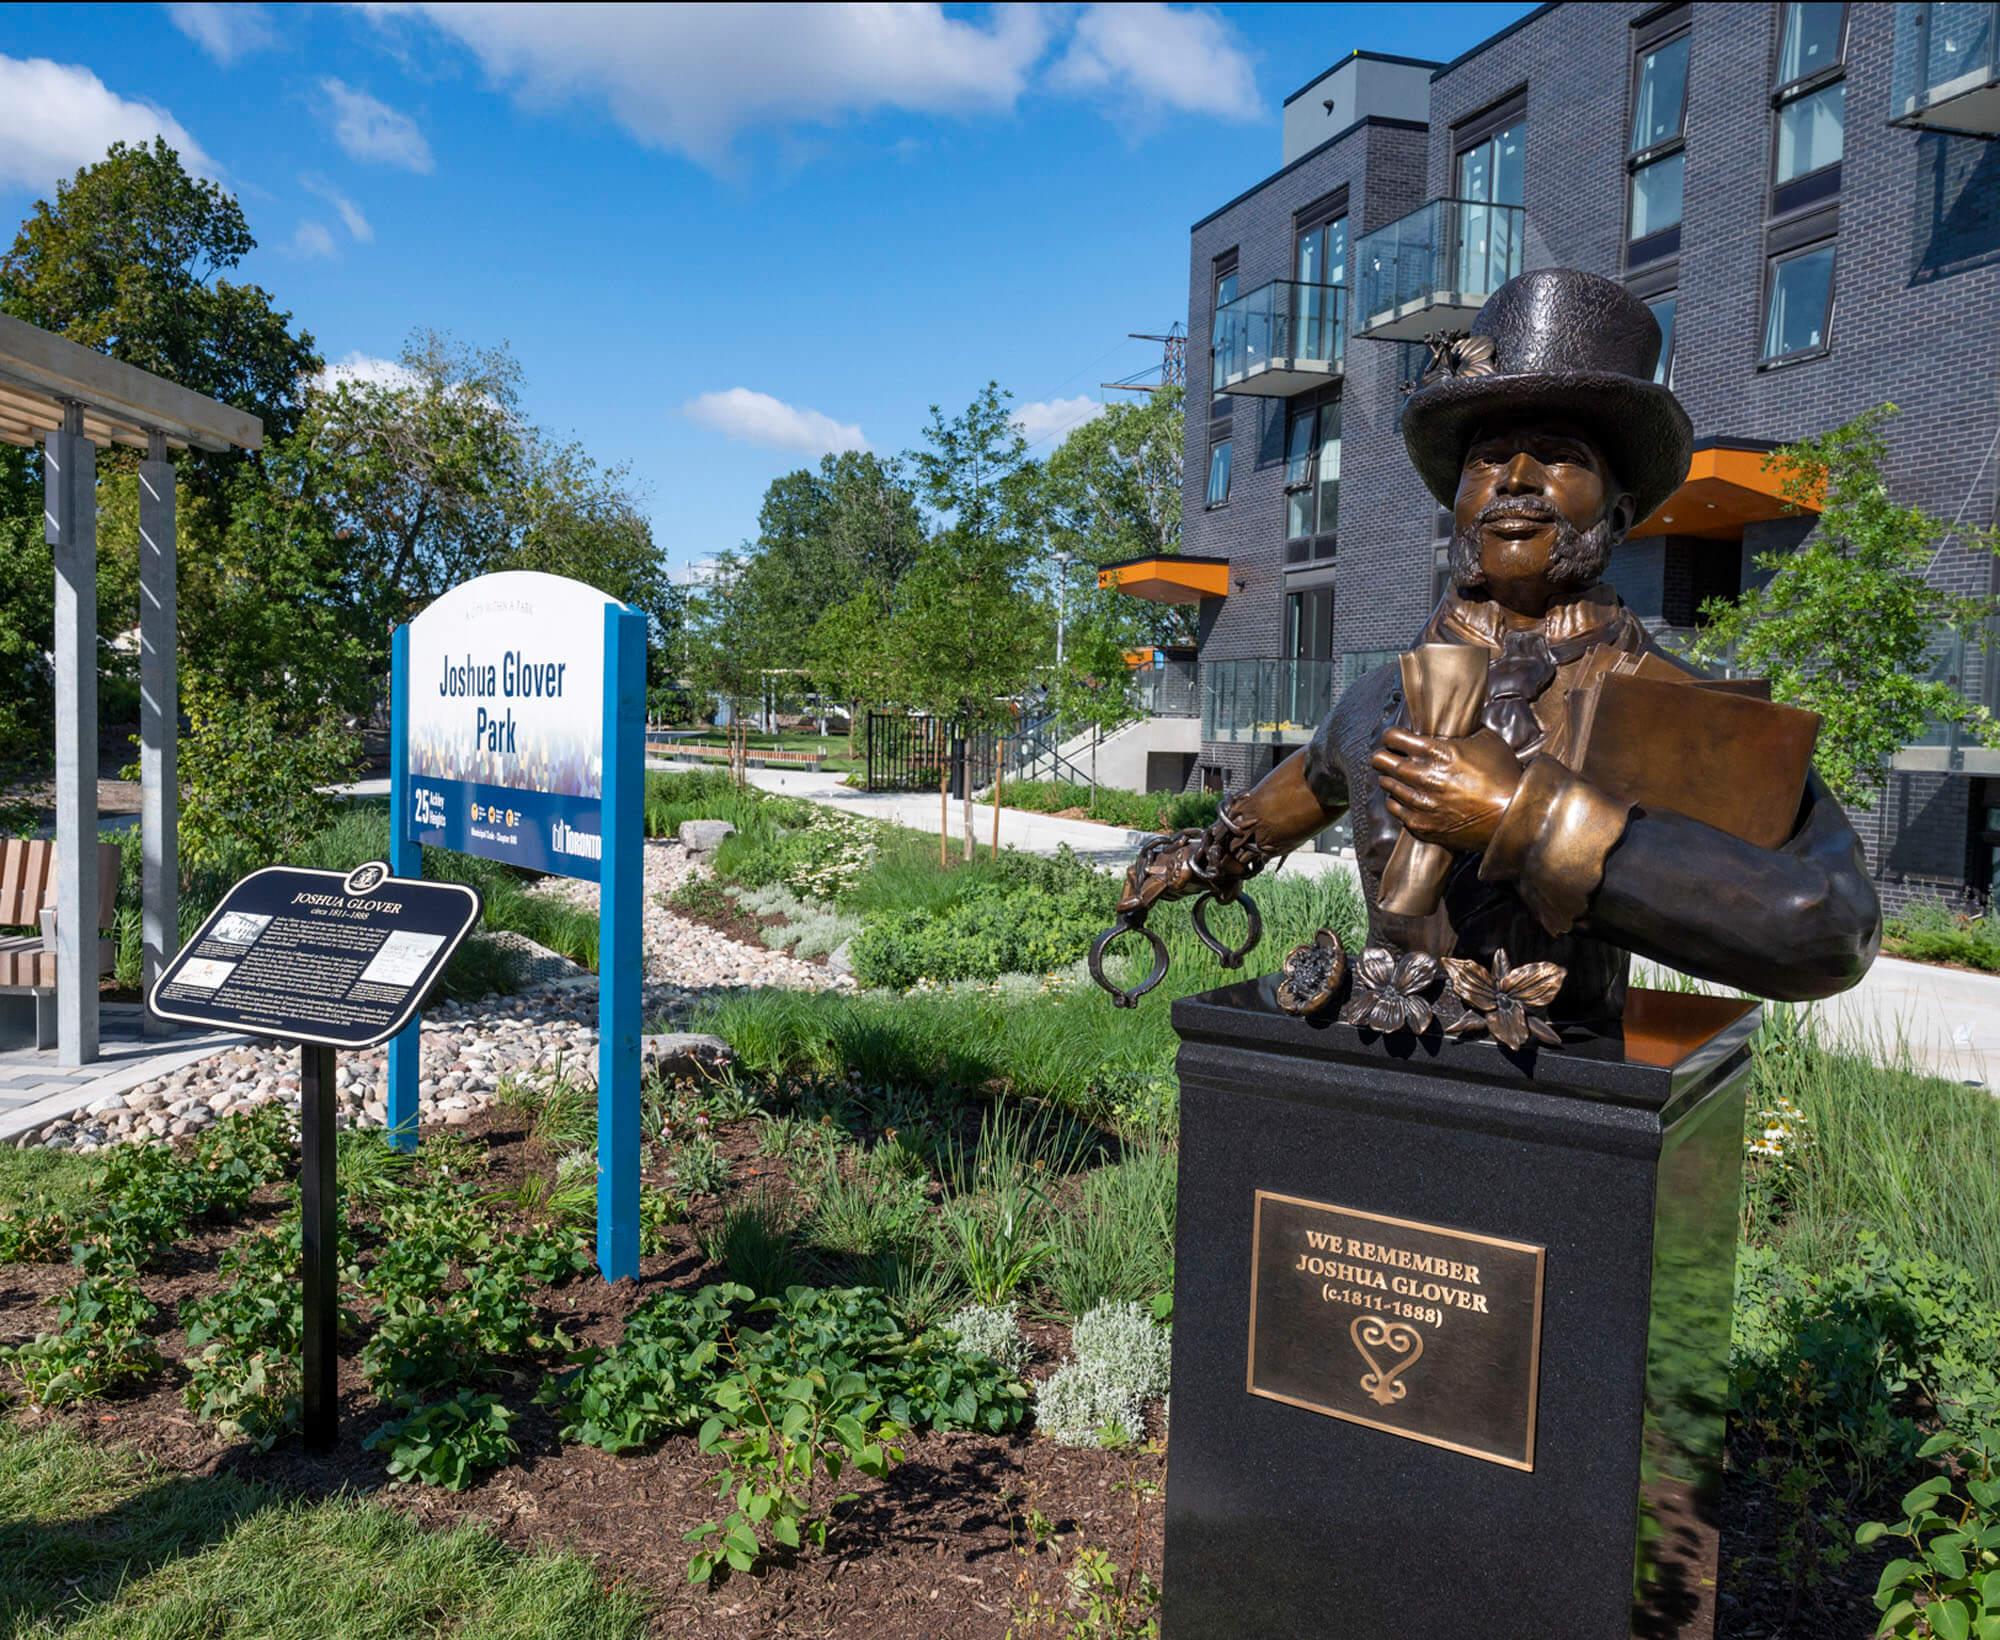 Image showing a park with bust of a man in a top hat on a pillar, a plaque on a post, and a sign reading Joshua Glover Park. Garden beds are visible with various plants and shrubs.